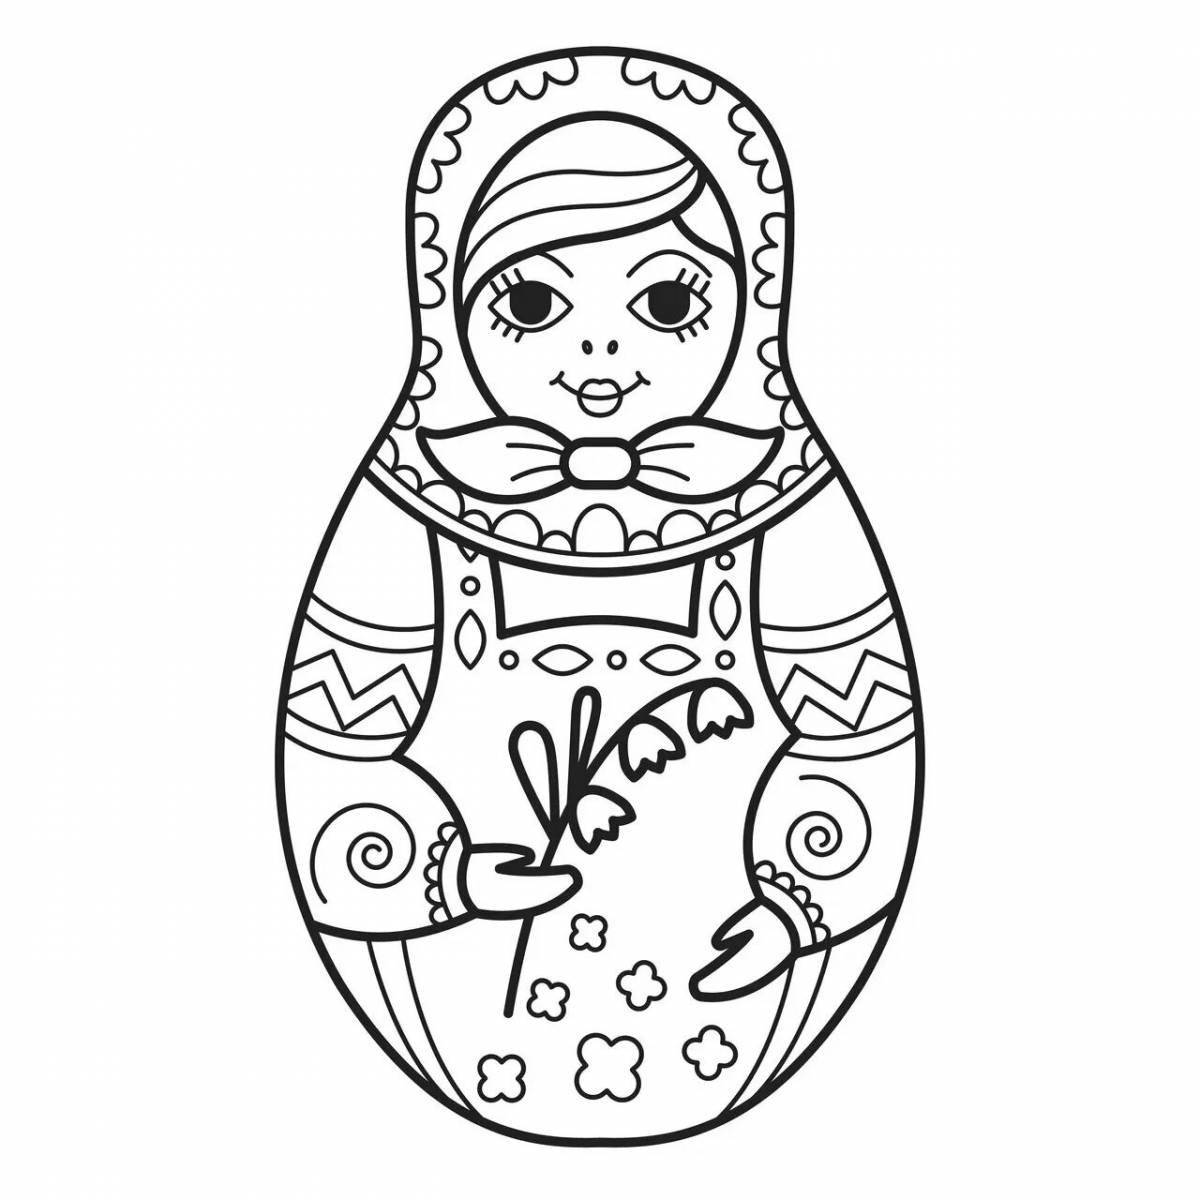 Colorful matryoshka coloring book for children 4-5 years old